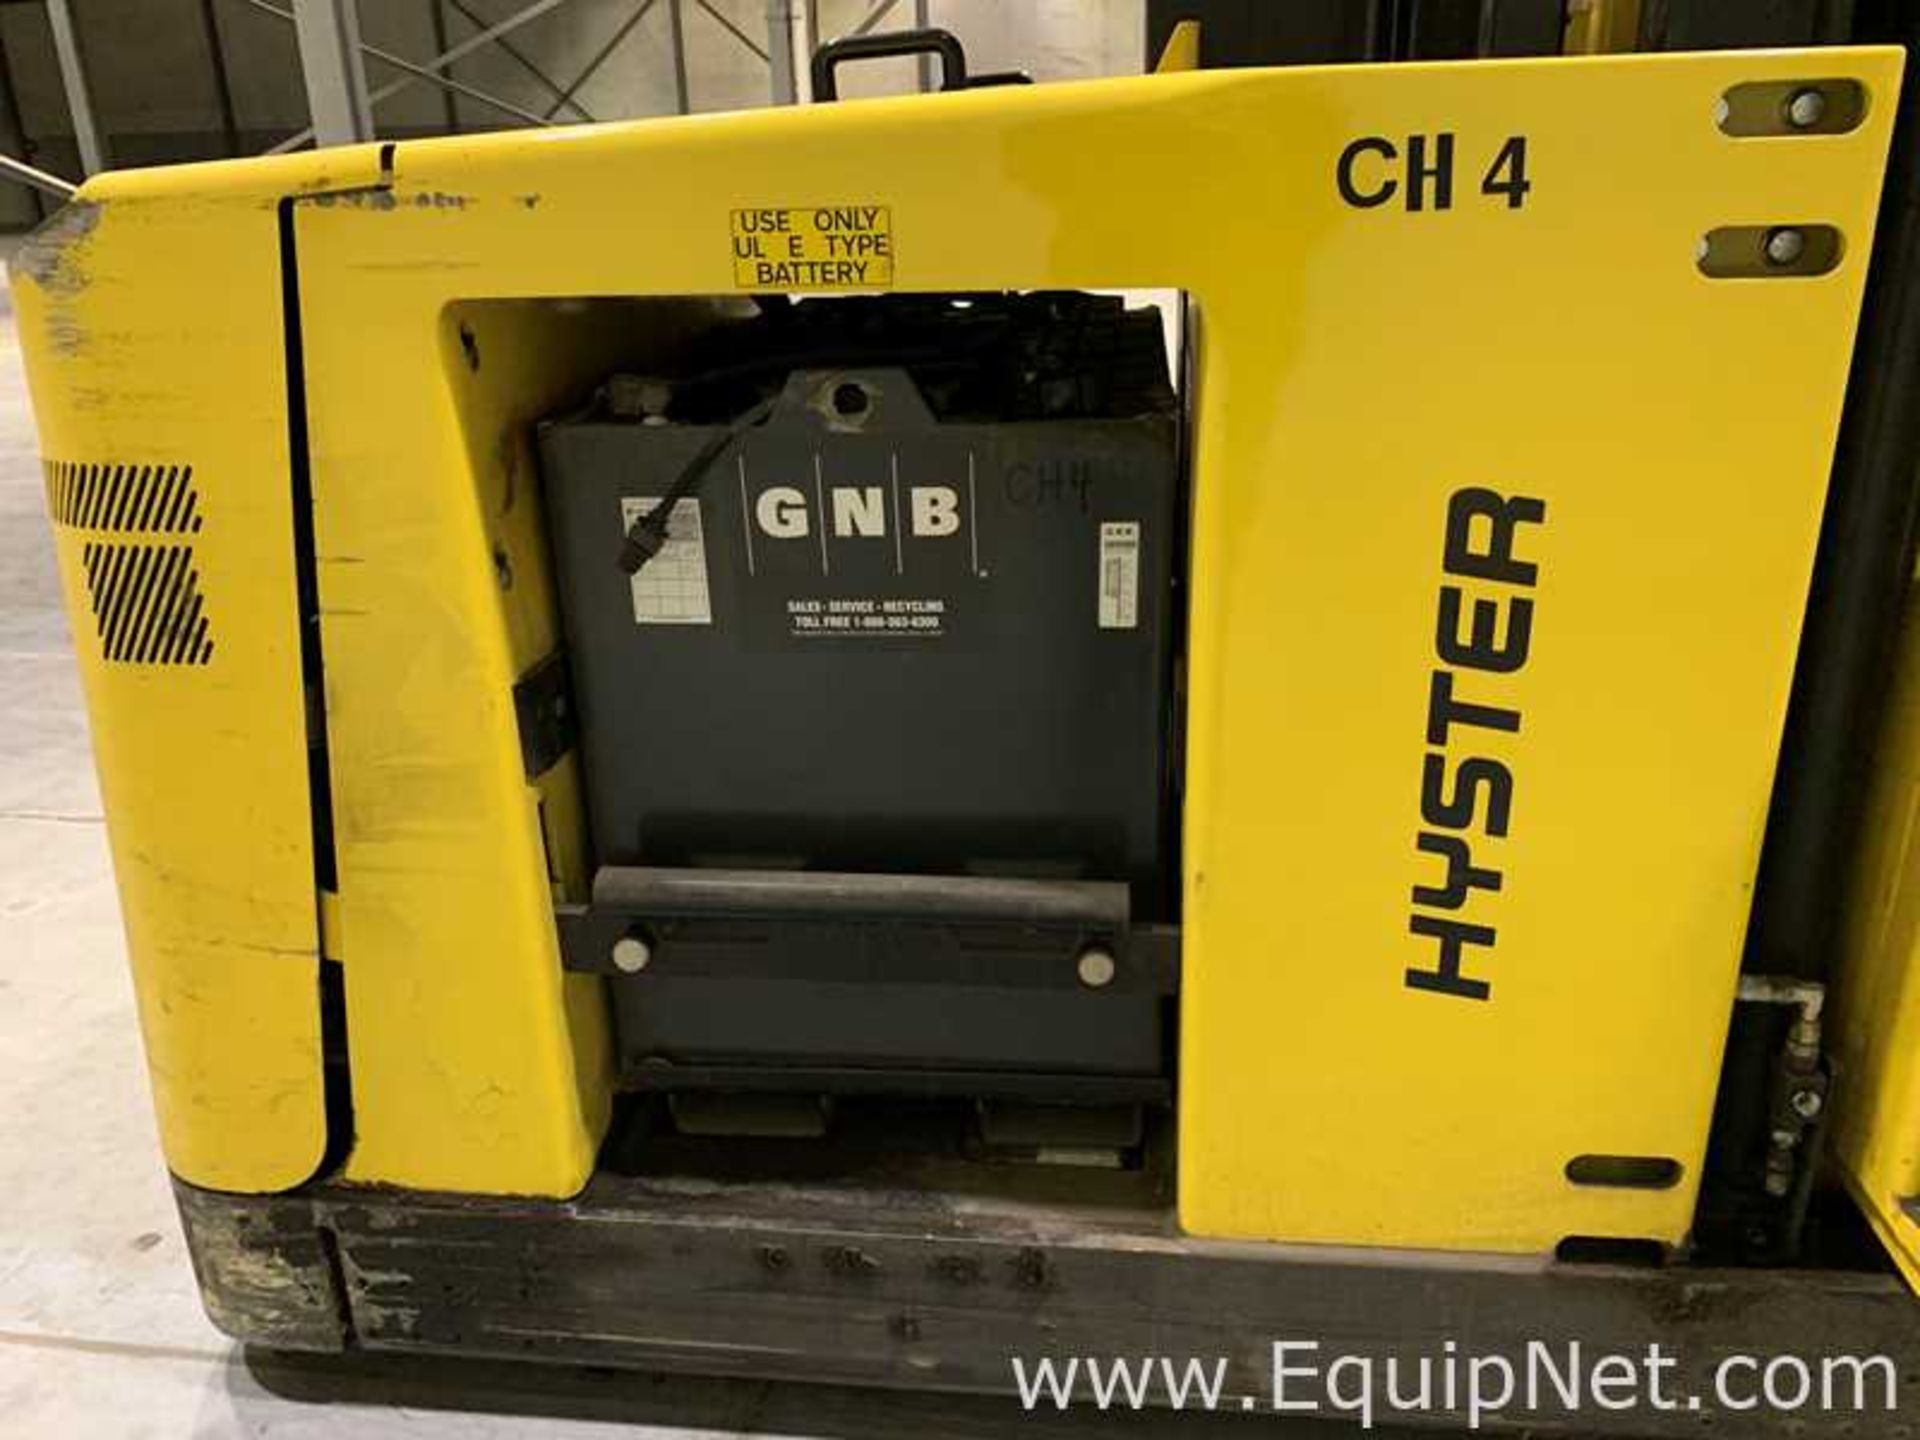 Hyster V30ZMU 3000 LB. Electric Very Narrow Aisle Truck CH4 - Image 6 of 18